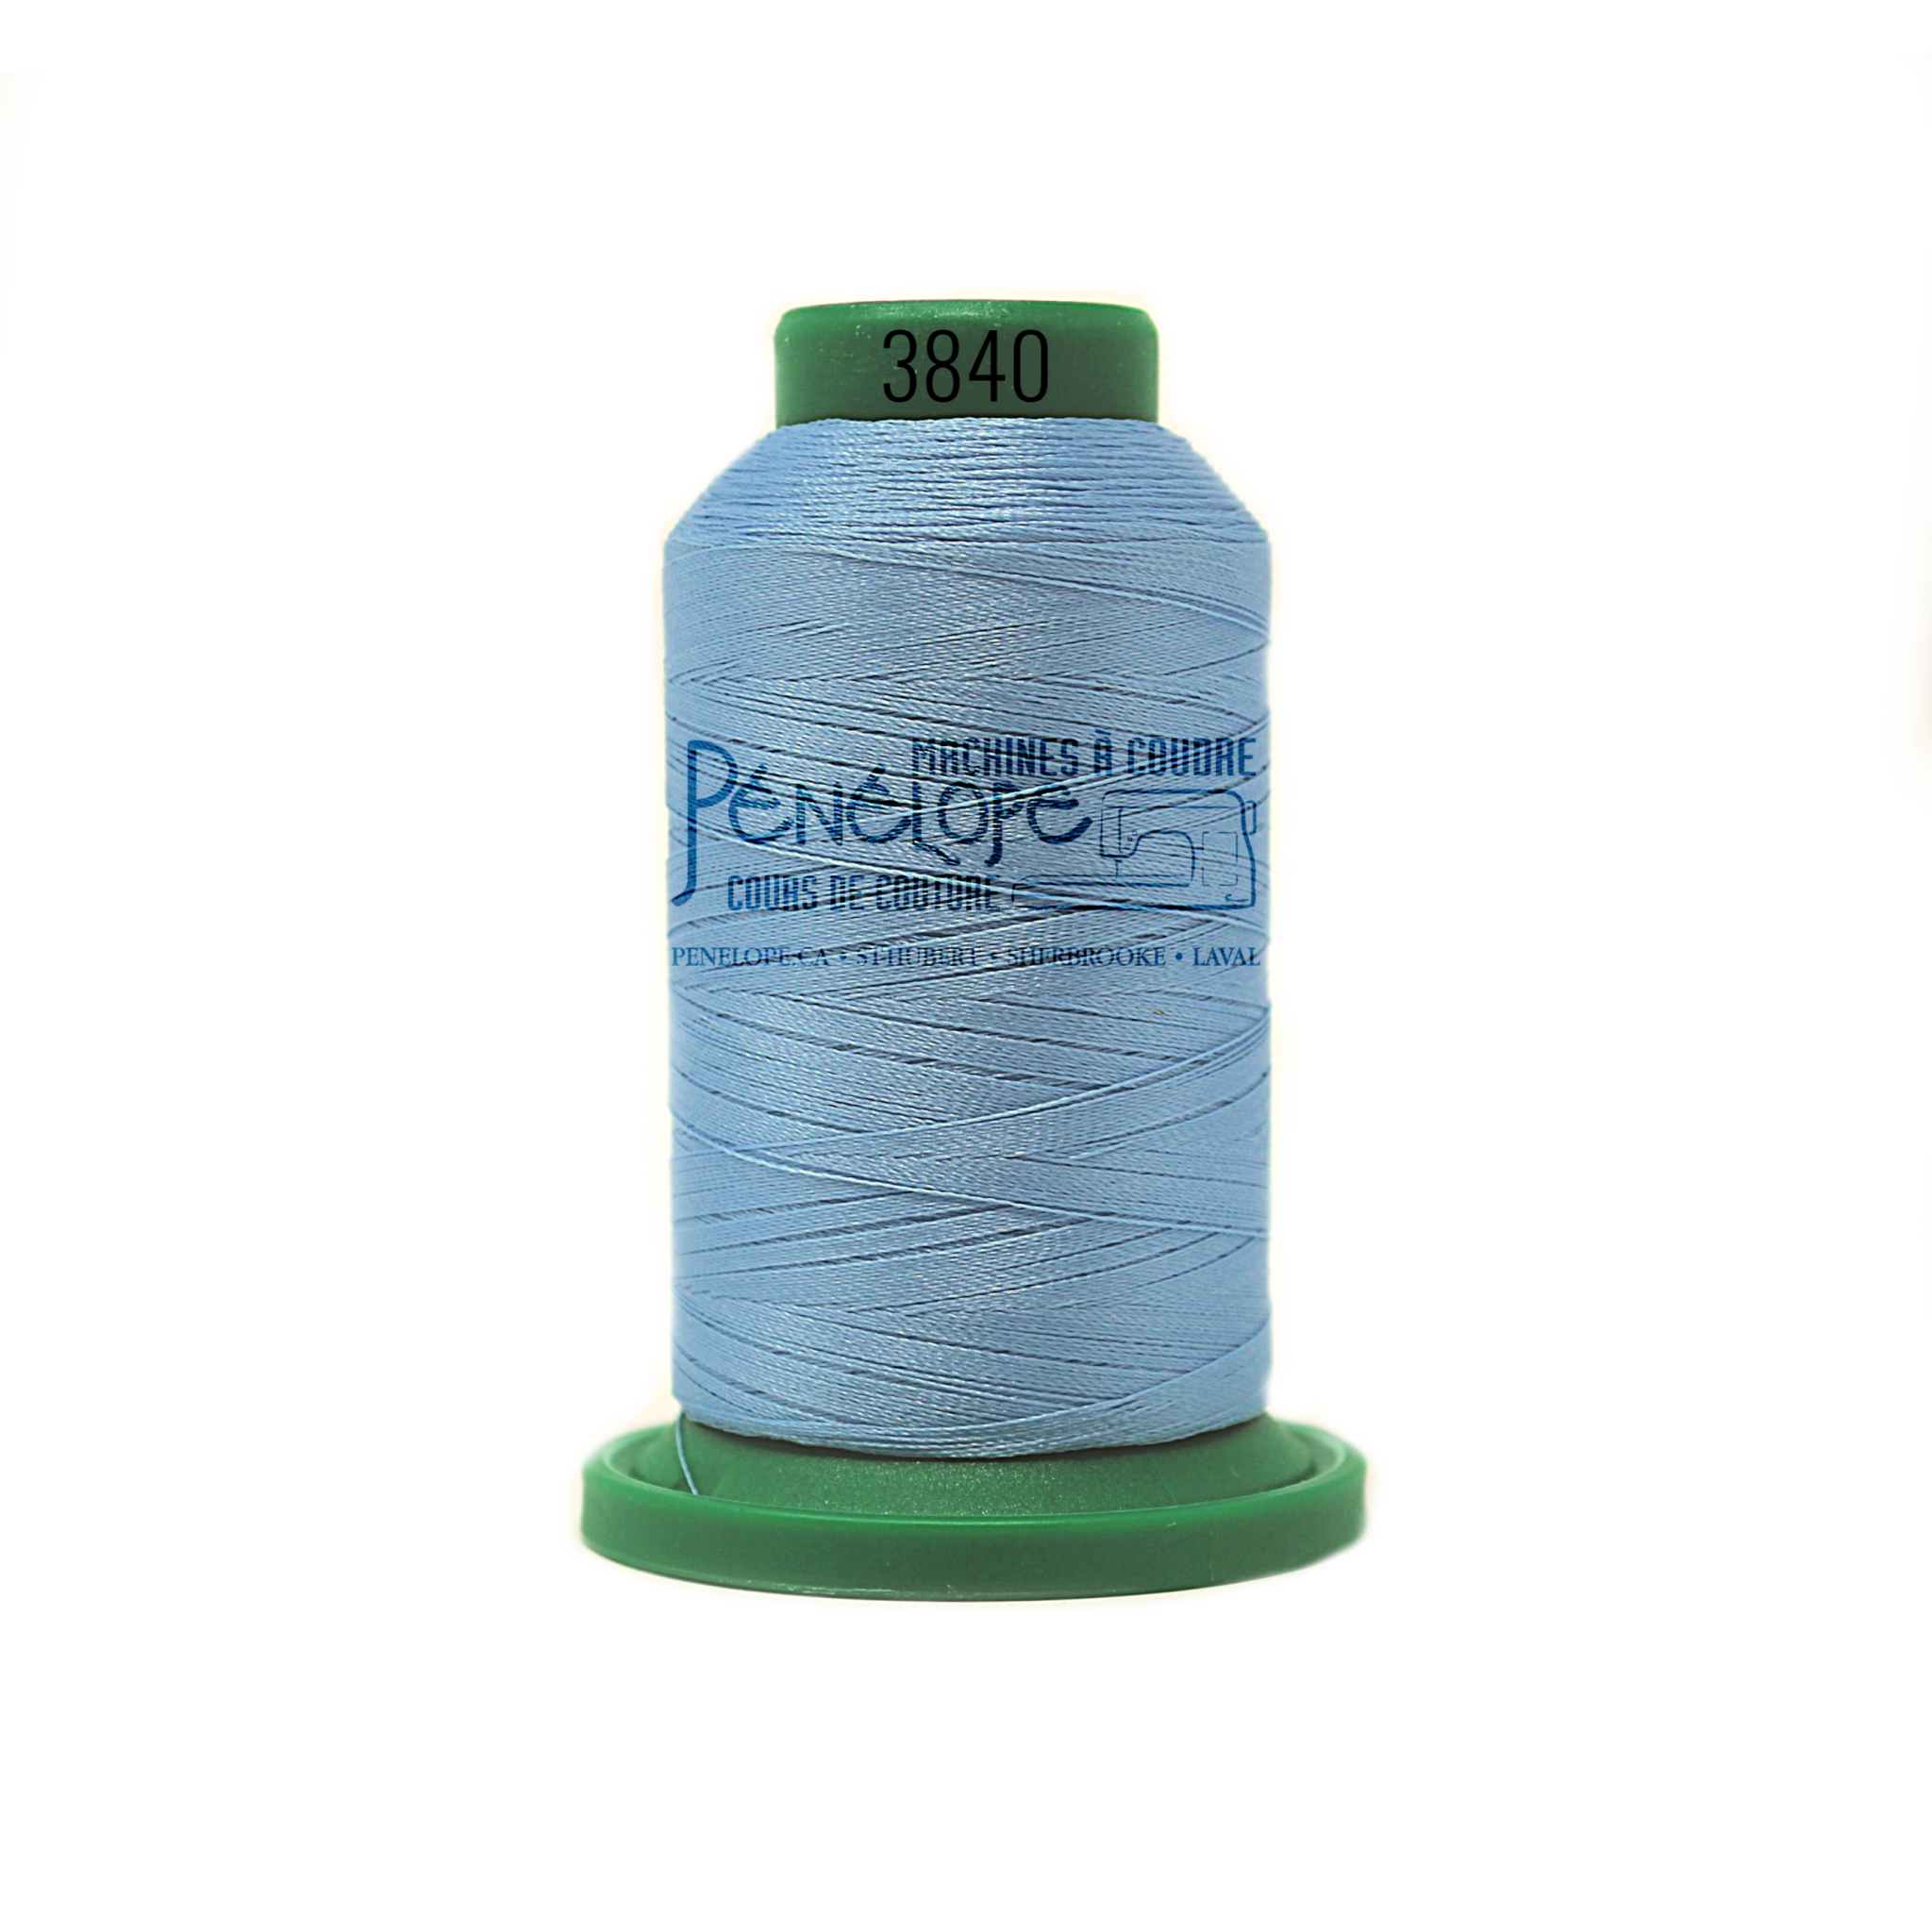 Isacord Isacord sewing and embroidery thread 3840